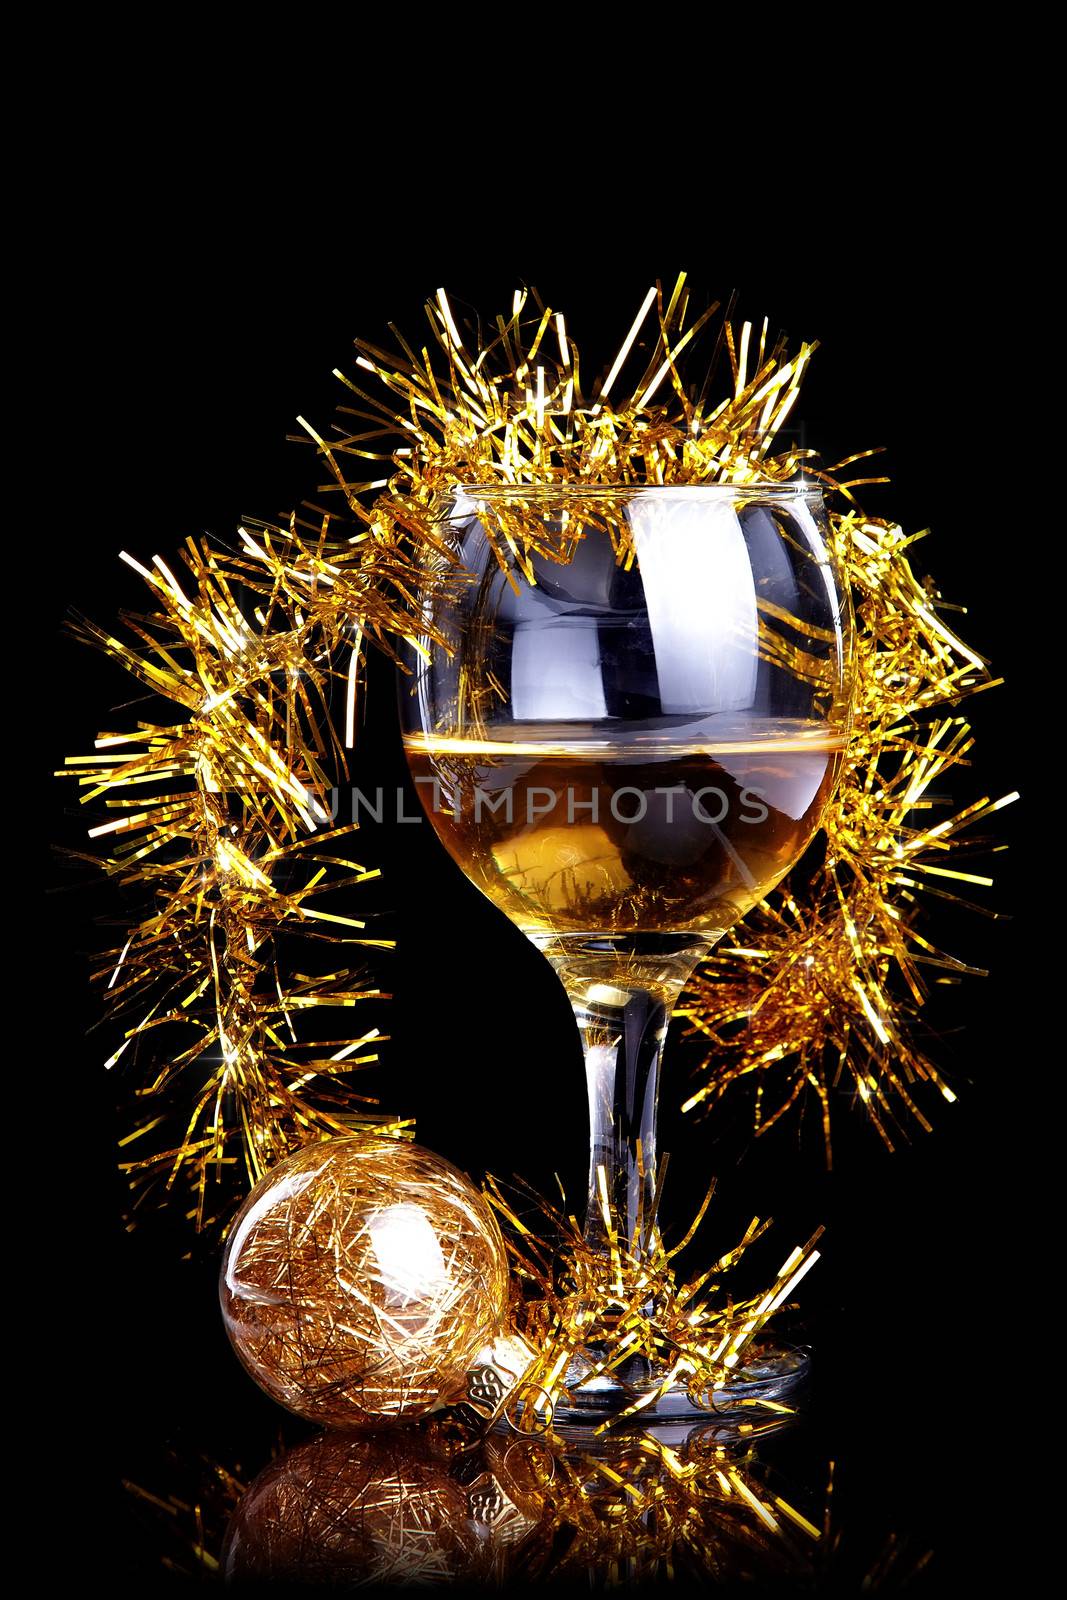 Glass with drink, a Christmas ball and tinsel on a black background. Glass with alcohol and a Christmas ball.